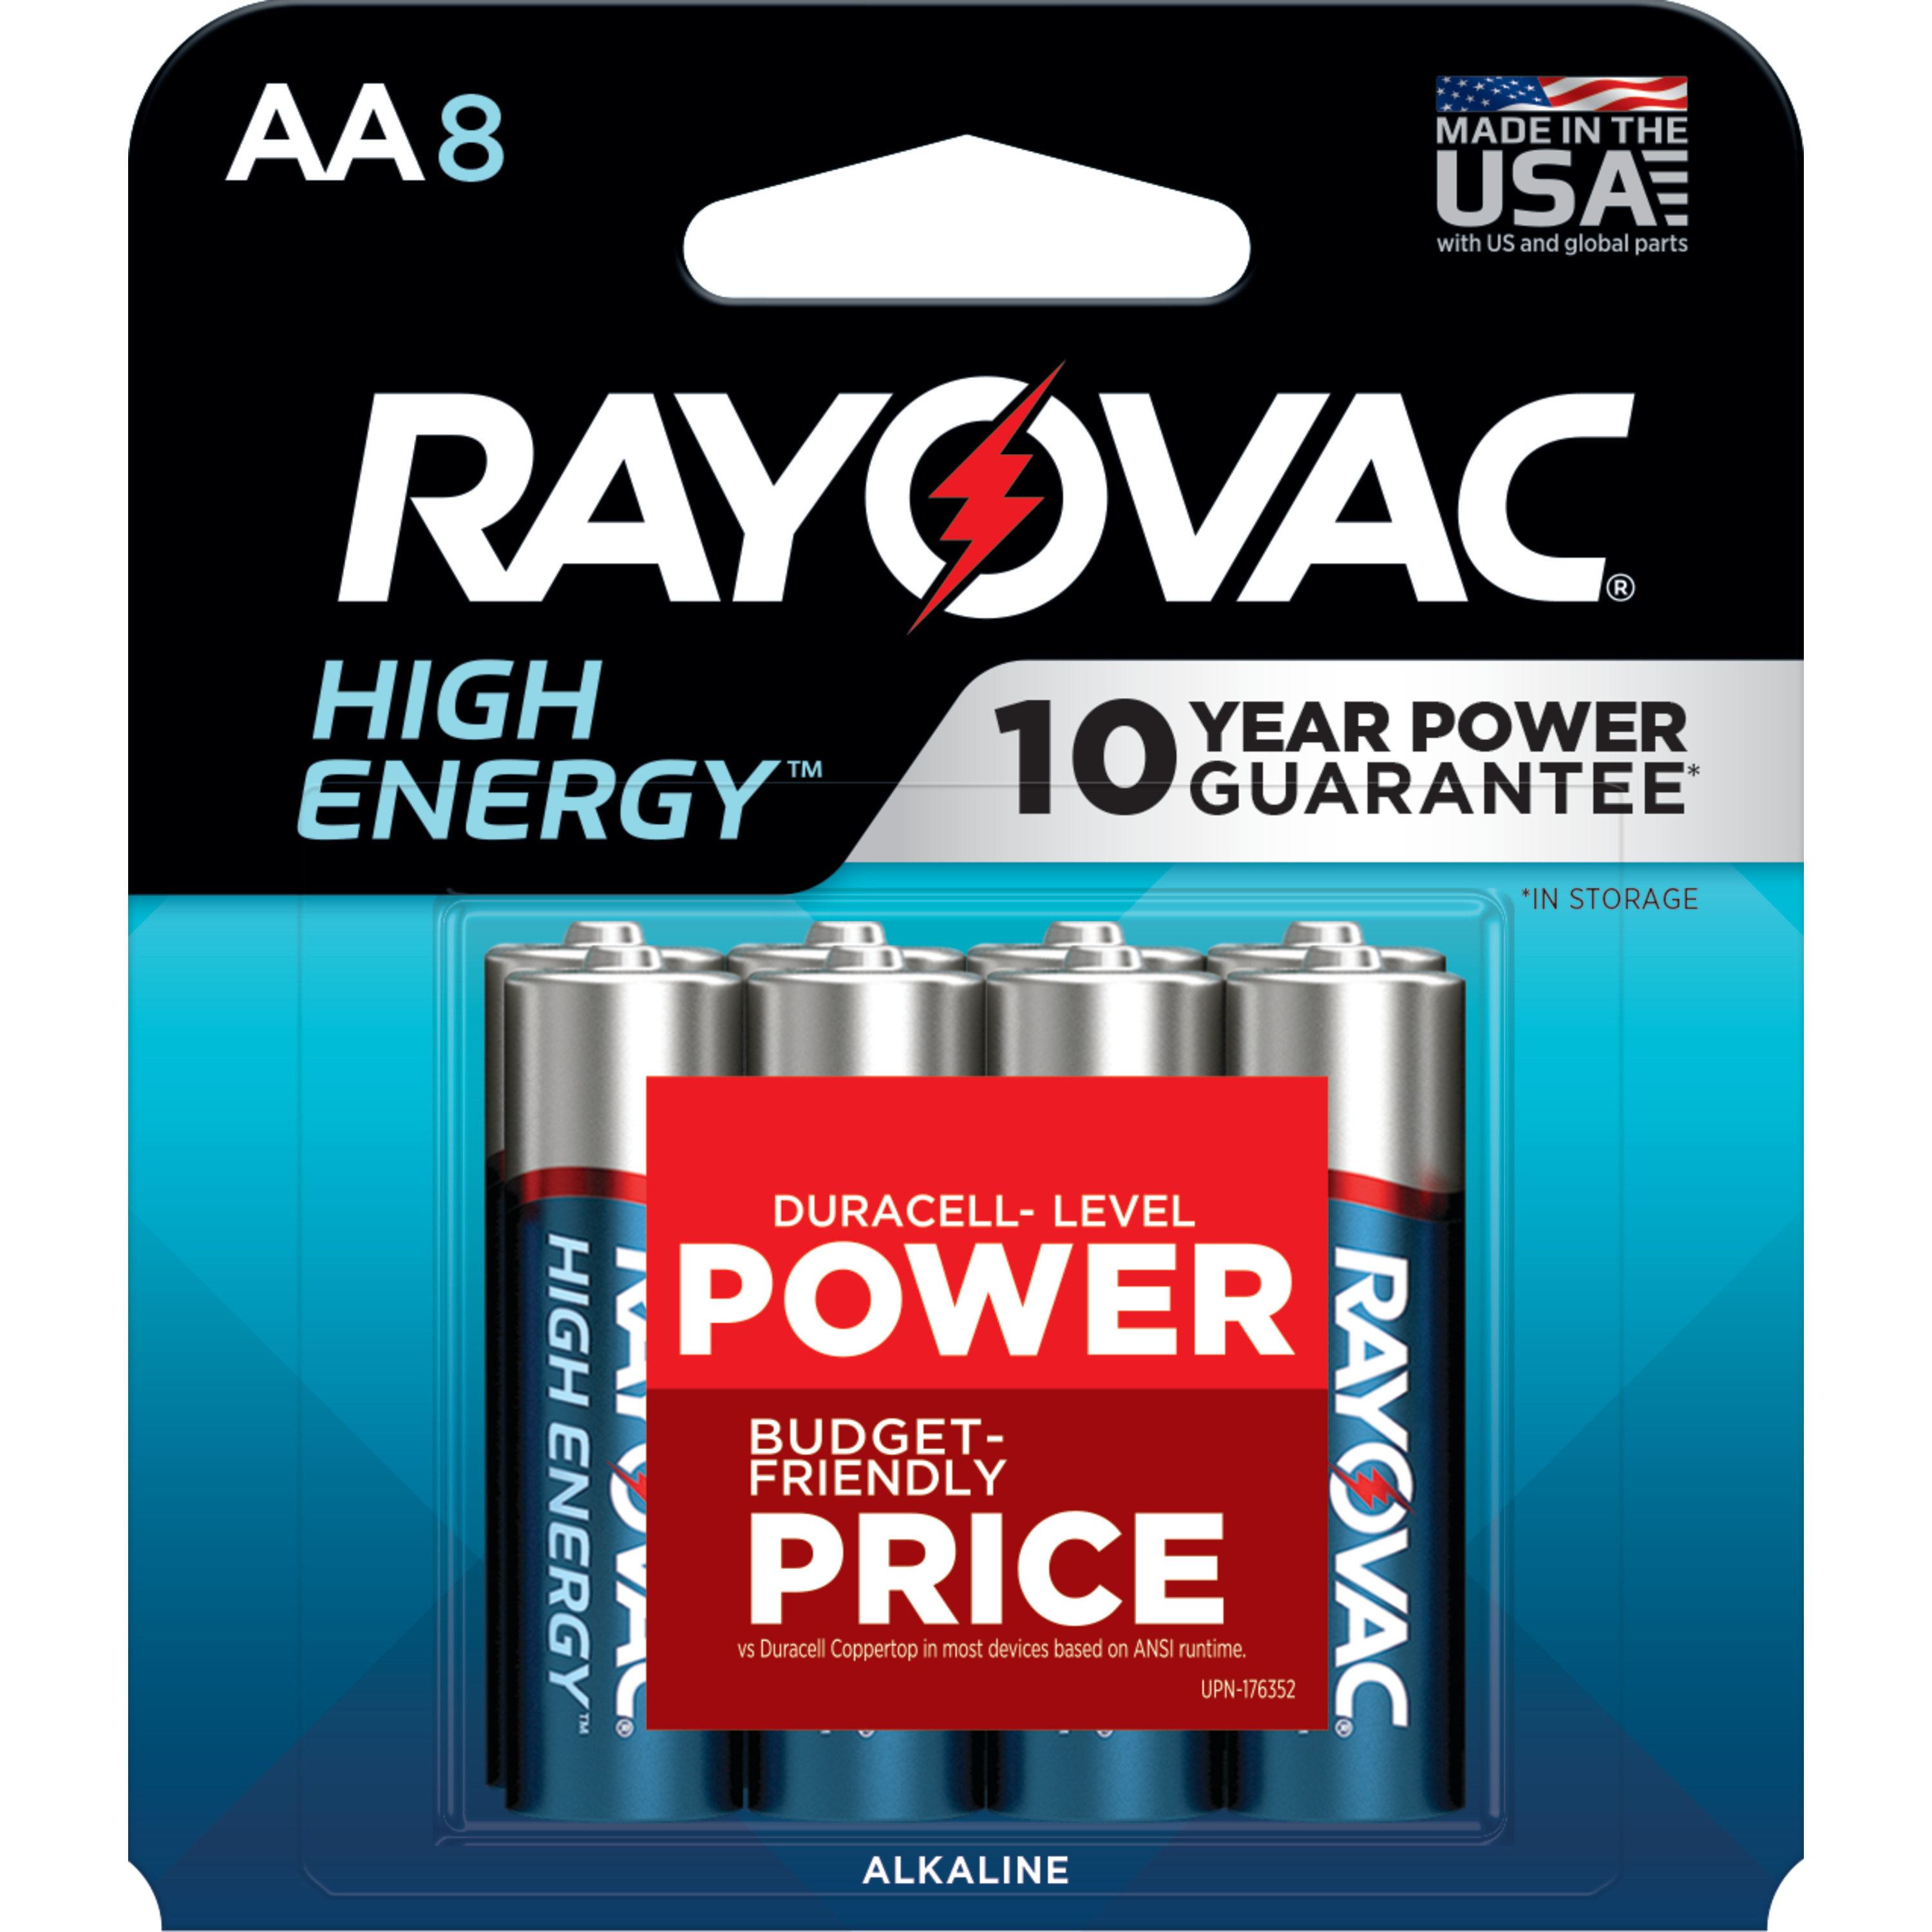 Rayovac High Energy AA Batteries (8 Pack), Double A Batteries - image 1 of 7